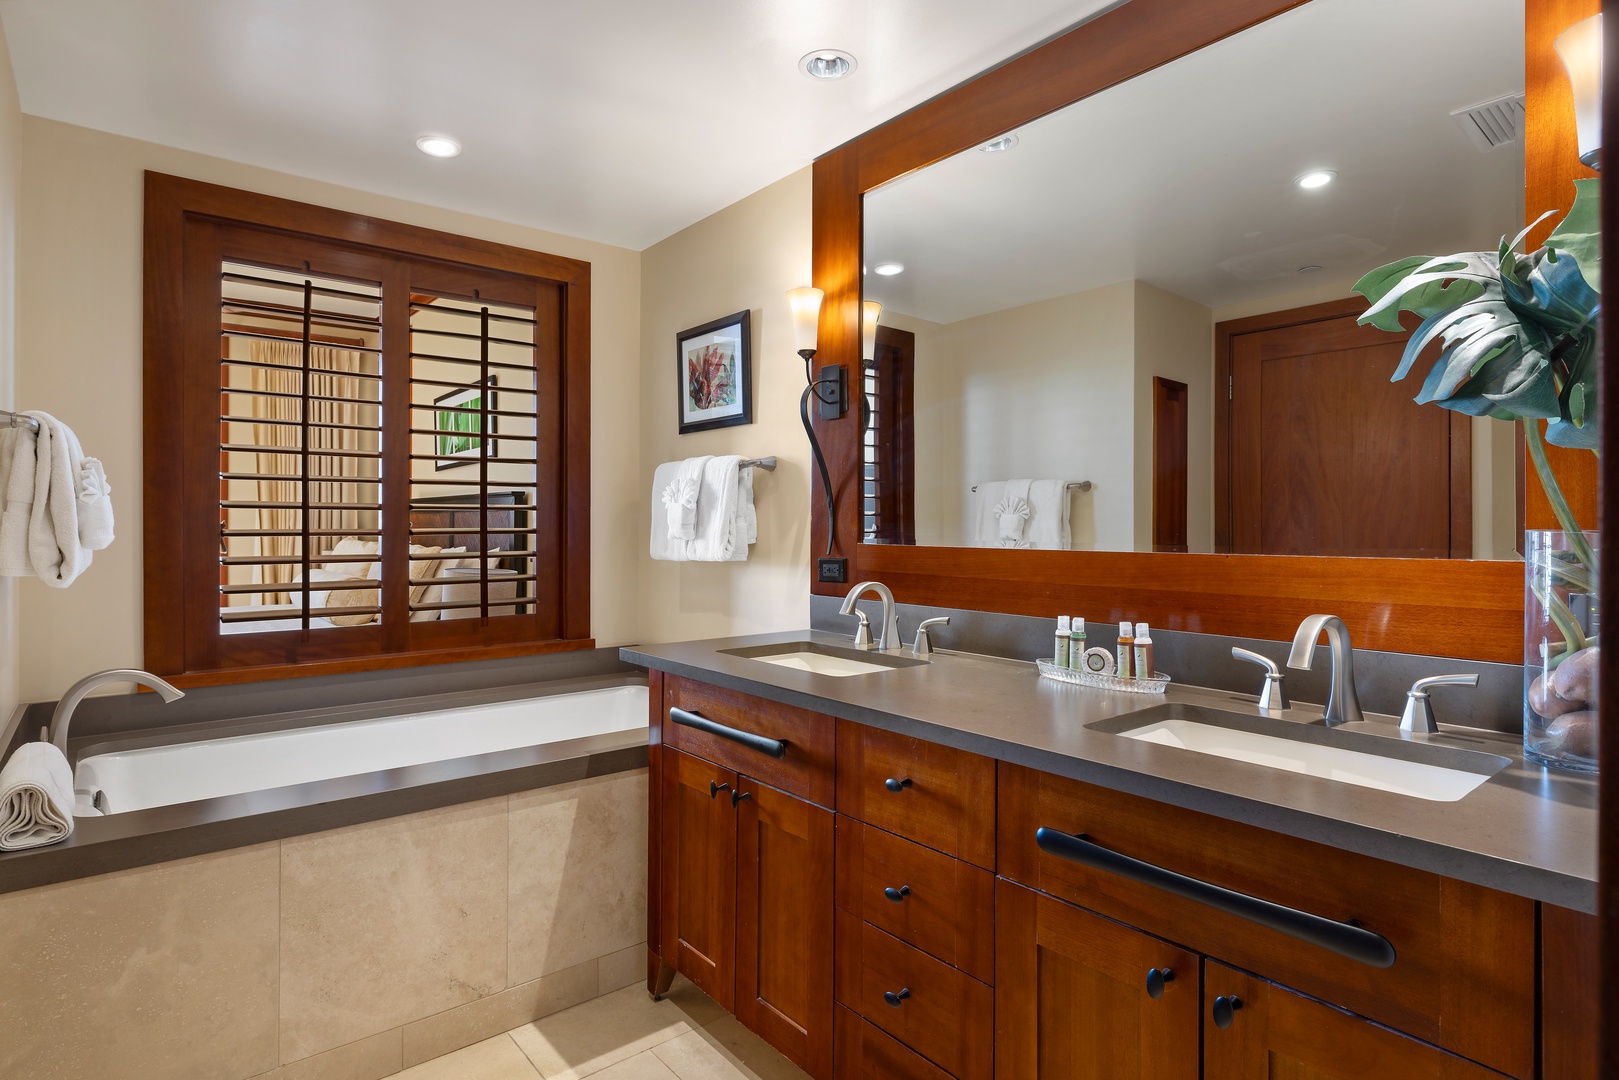 Kapolei Vacation Rentals, Ko Olina Beach Villas B610 - The primary guest bathroom with a walk-in shower and soaking tub.